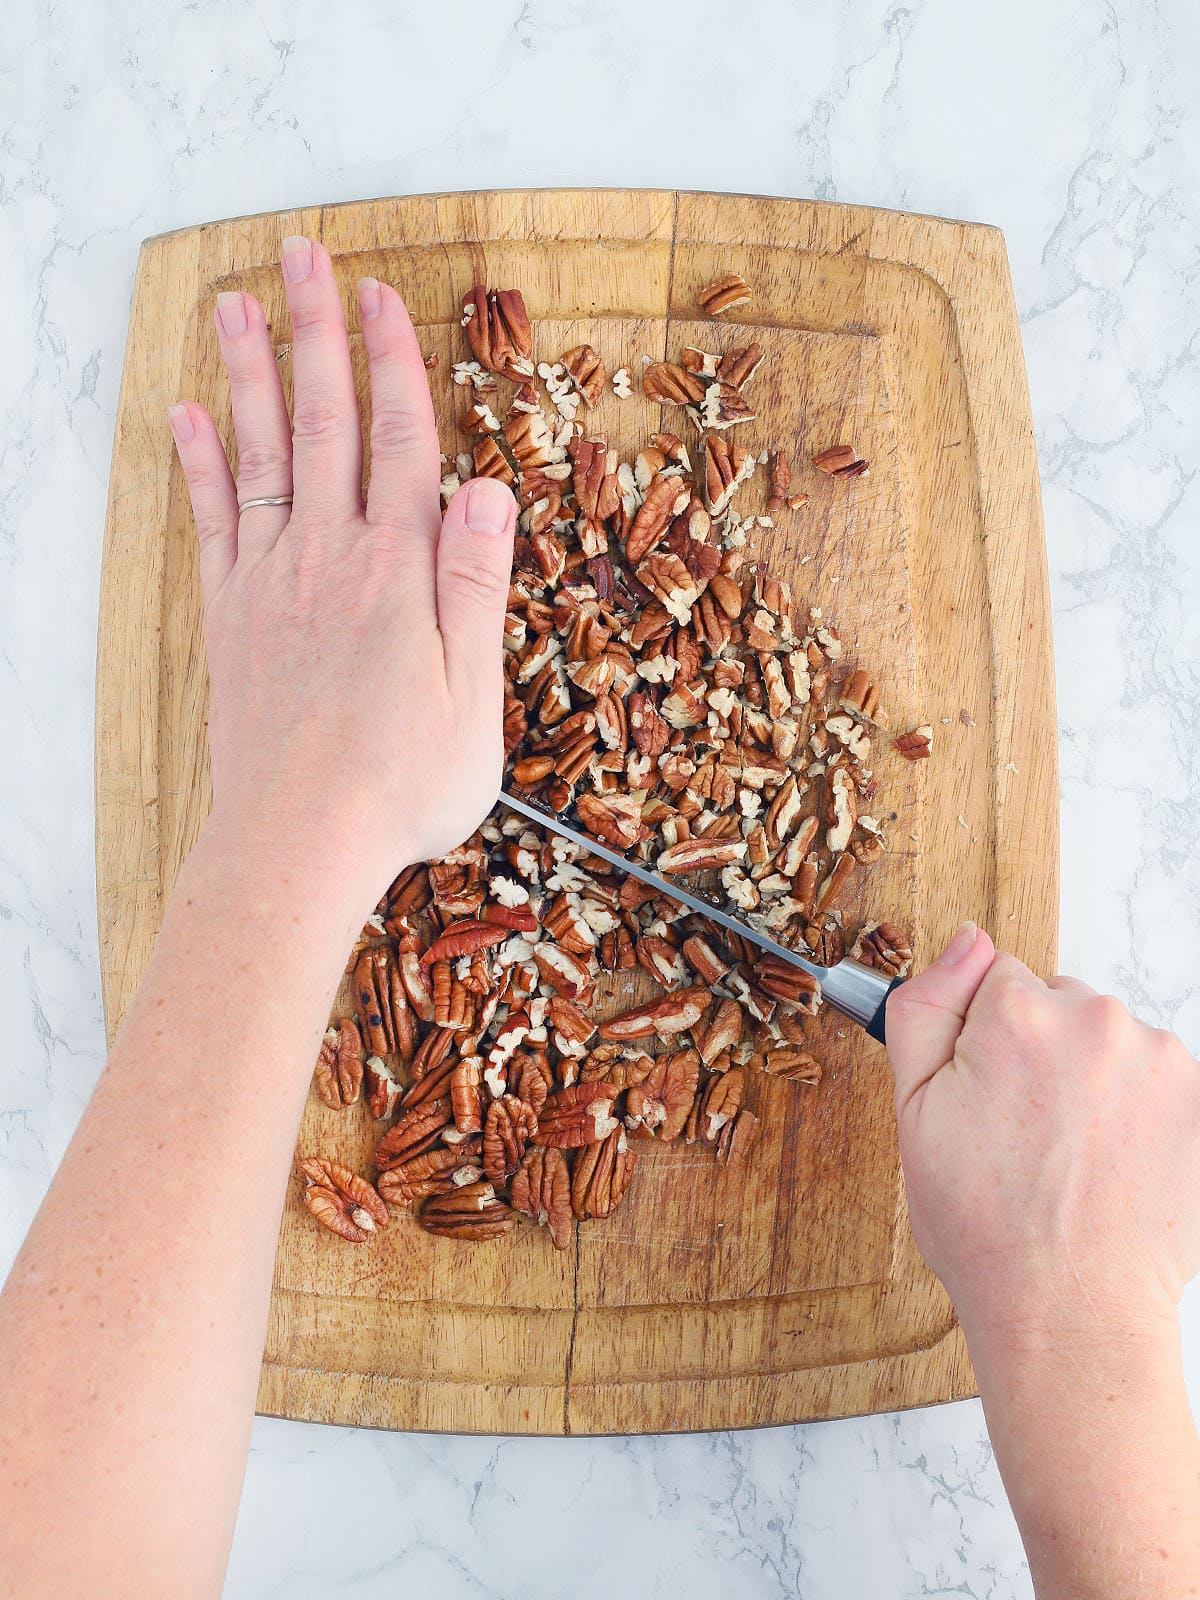 hands finely chopping pecans on a wooden cutting board